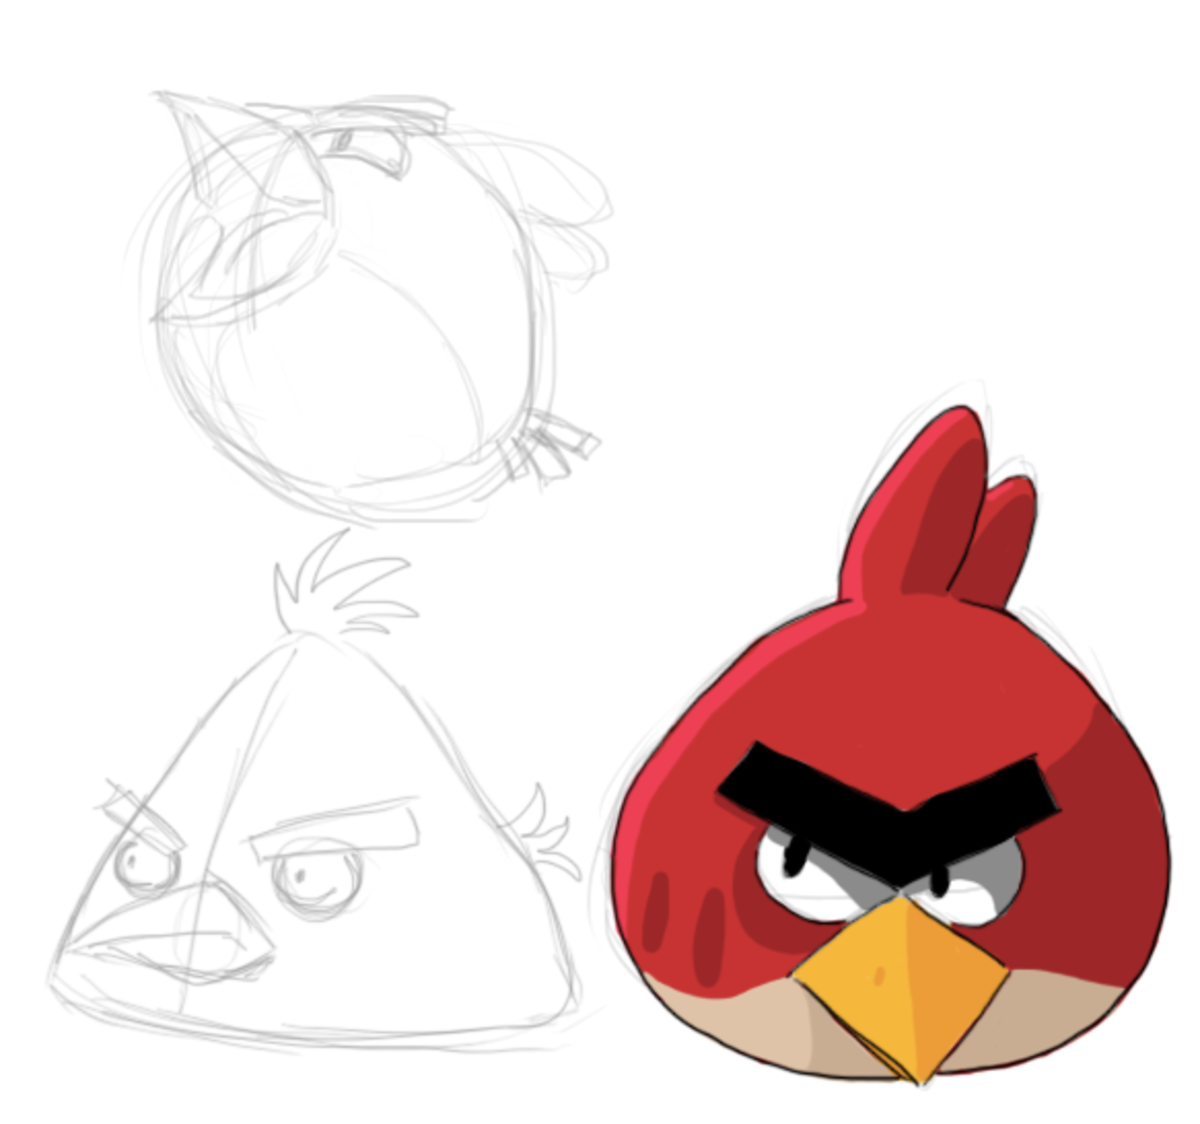 How to Draw Red Angry Birds in Pencil - Artist Rage - Costin Craioveanu-saigonsouth.com.vn